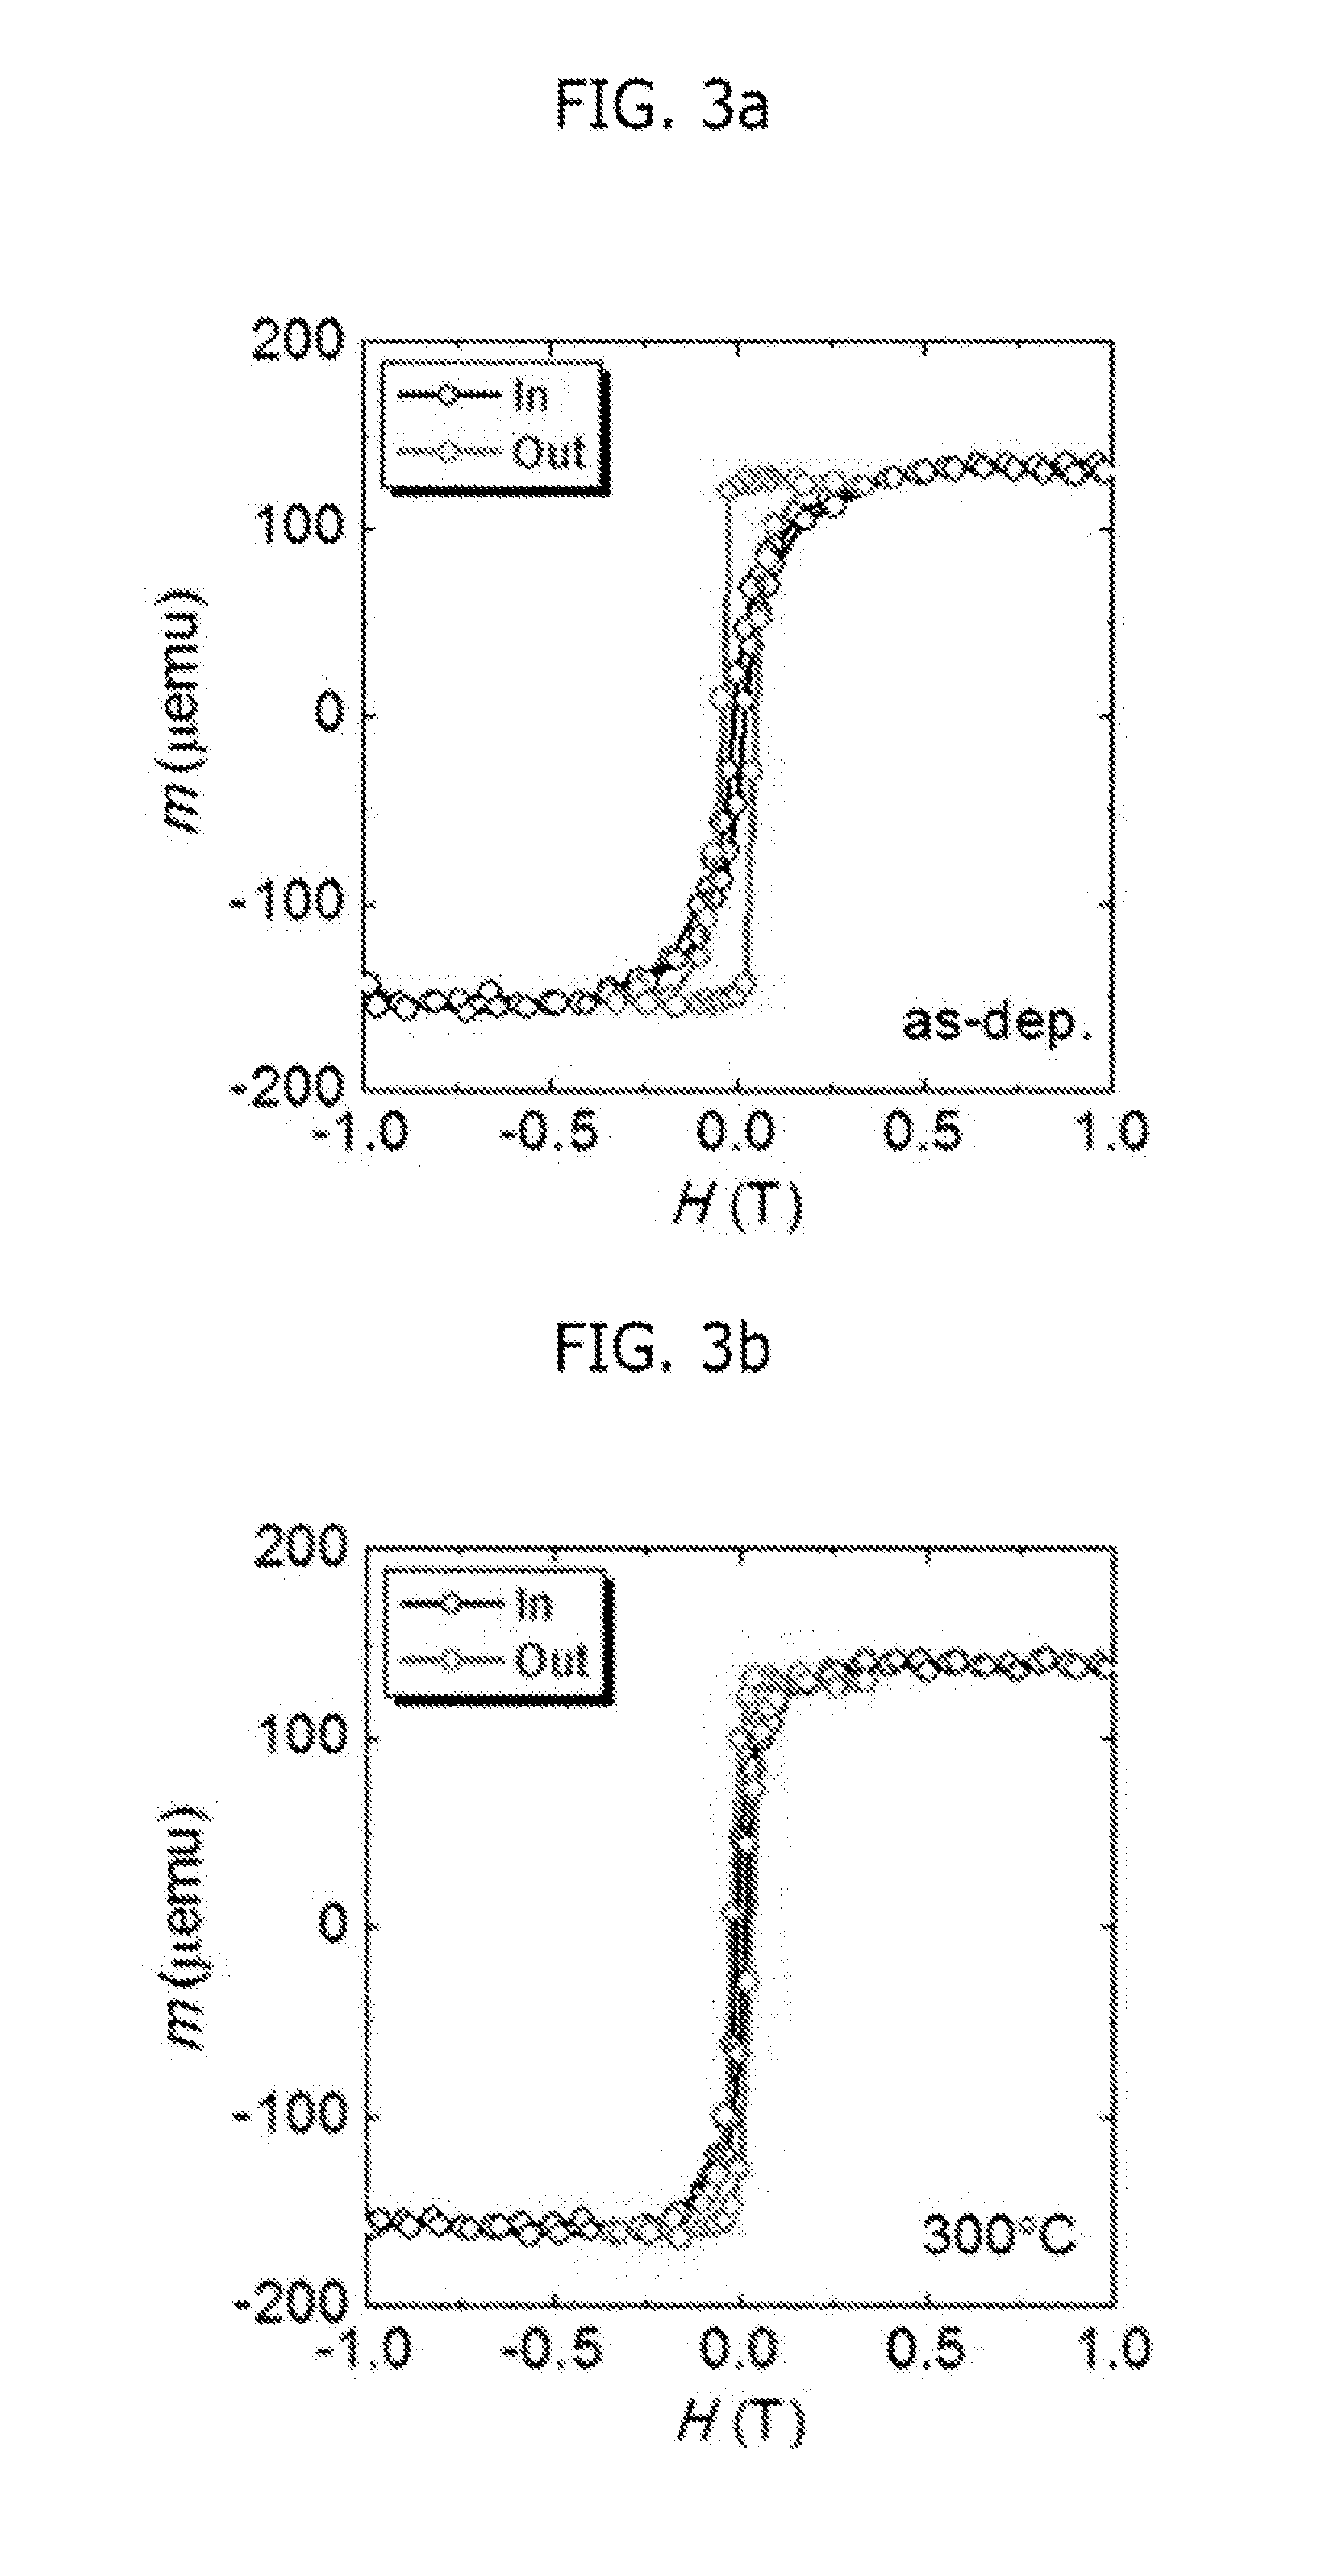 Cobalt (CO) and platinum (PT)-based multilayer thin film having inverted structure and method for manufacturing same